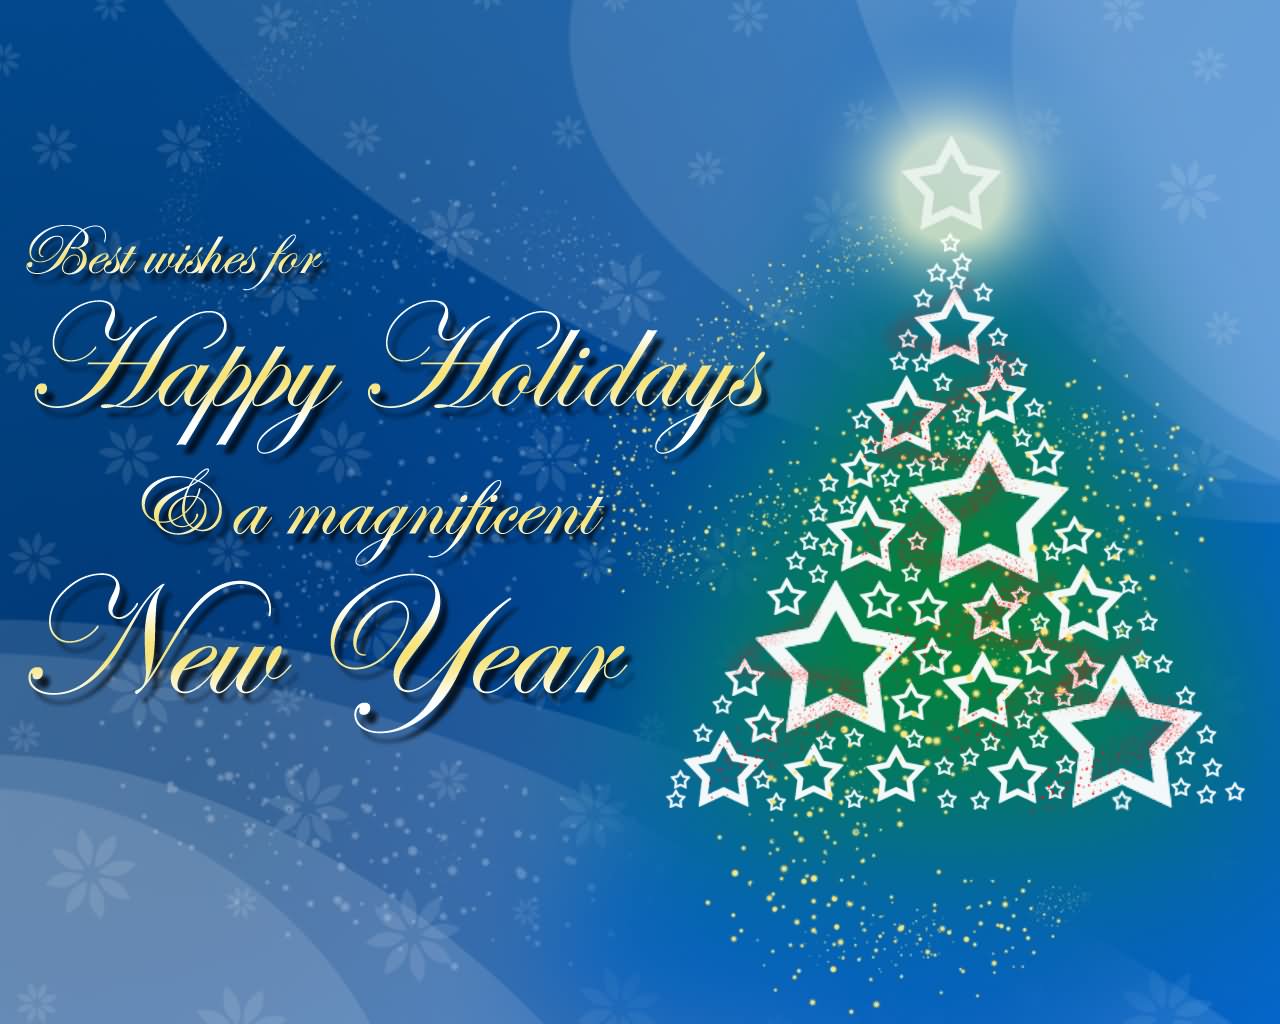 Best Wishes For Happy Holidays And A Magnificent New Year